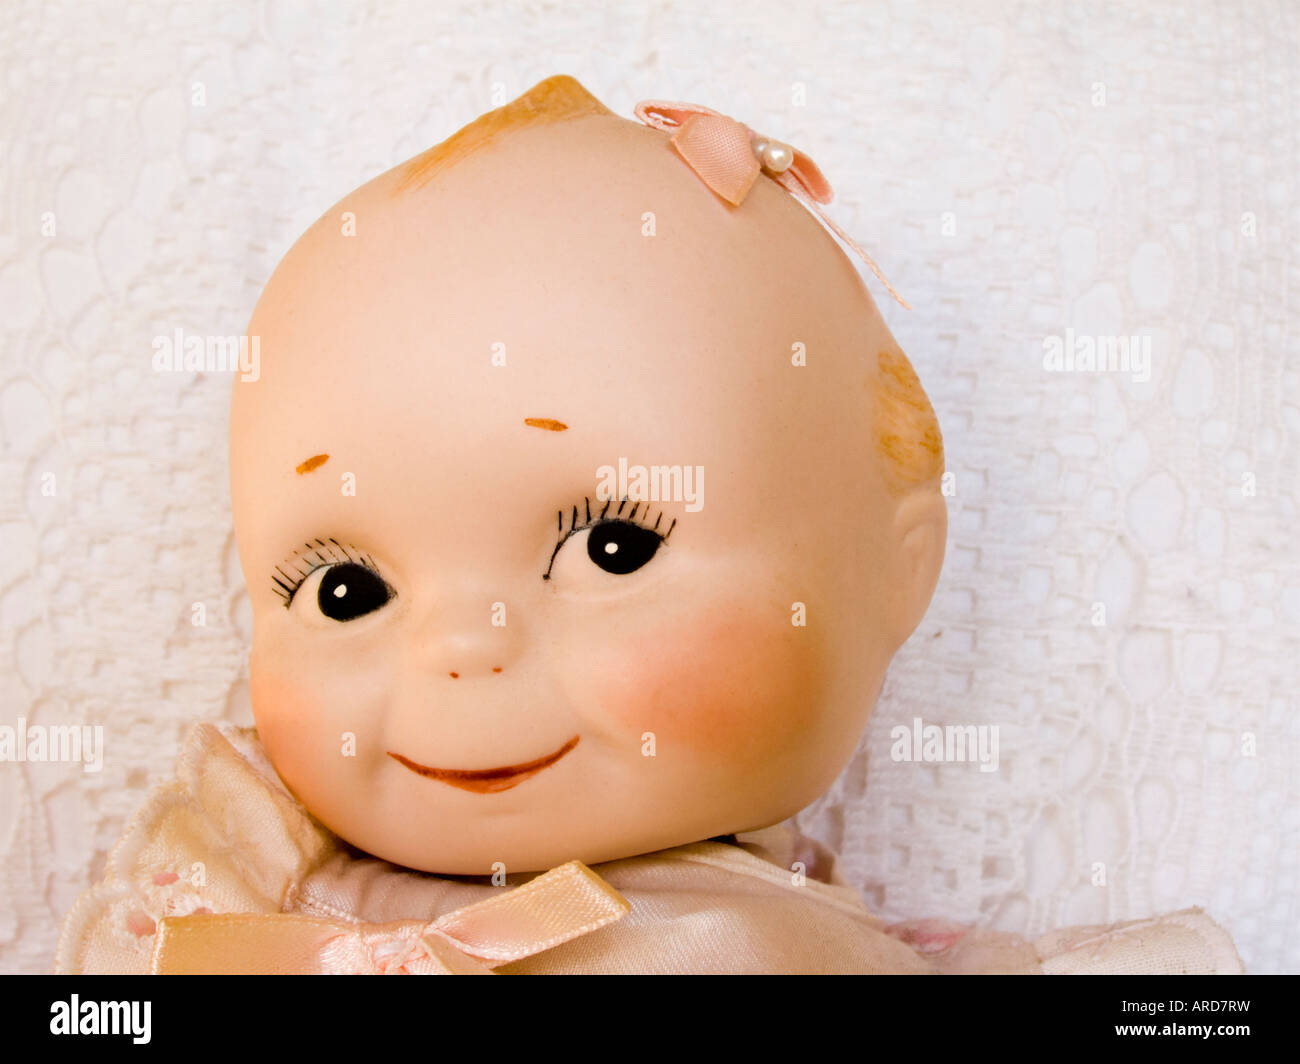 Adorable Baby Doll Stock Photo